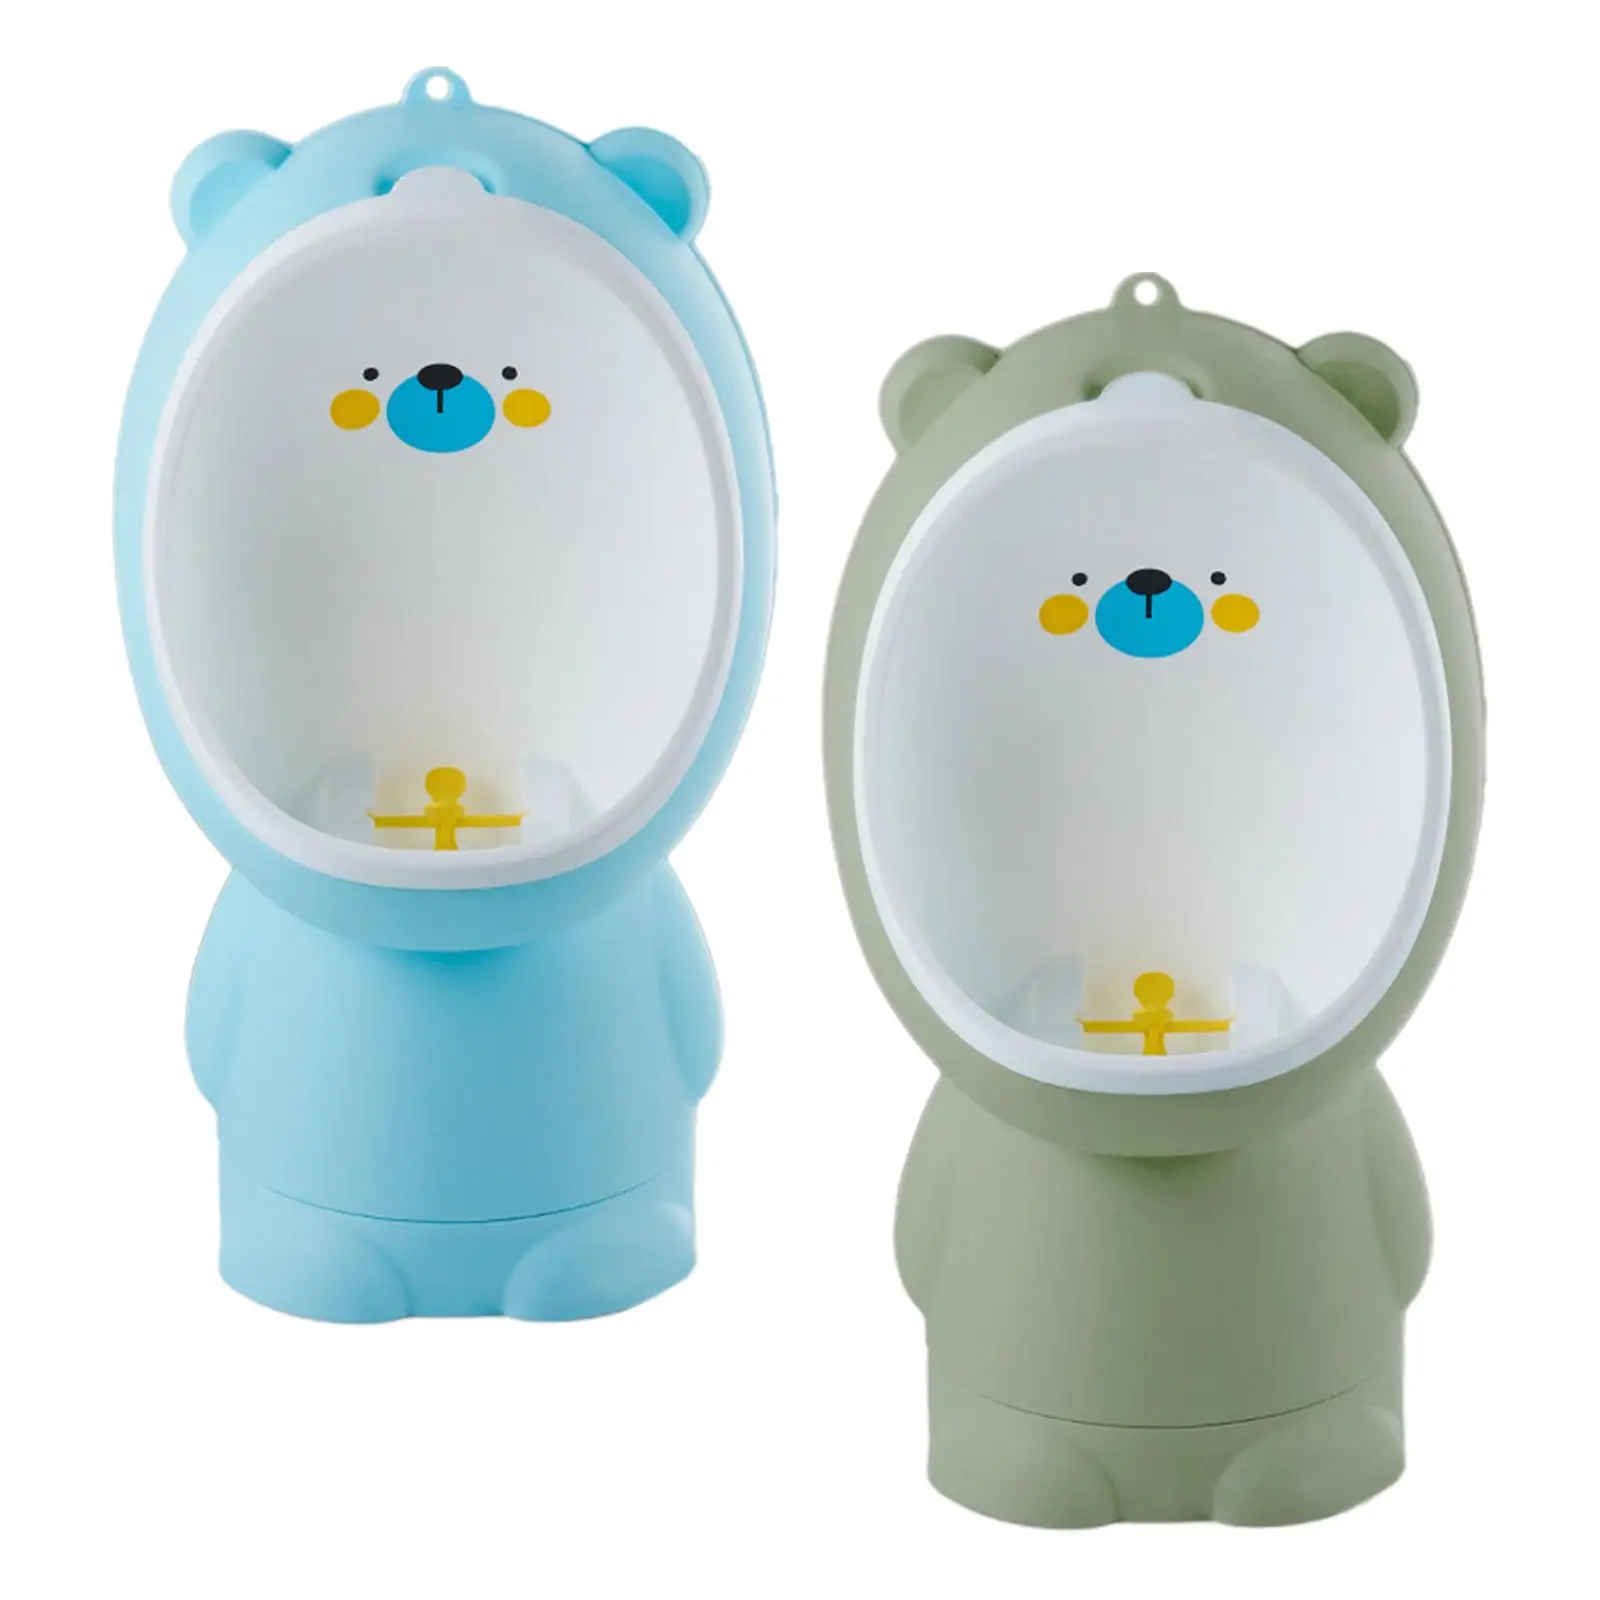 Cute Bear Potty Trainer Urinal Urinal Pee Trainer Standing Potty Urinal Urinals Toilet Training for Baby Boys Child Toddlers